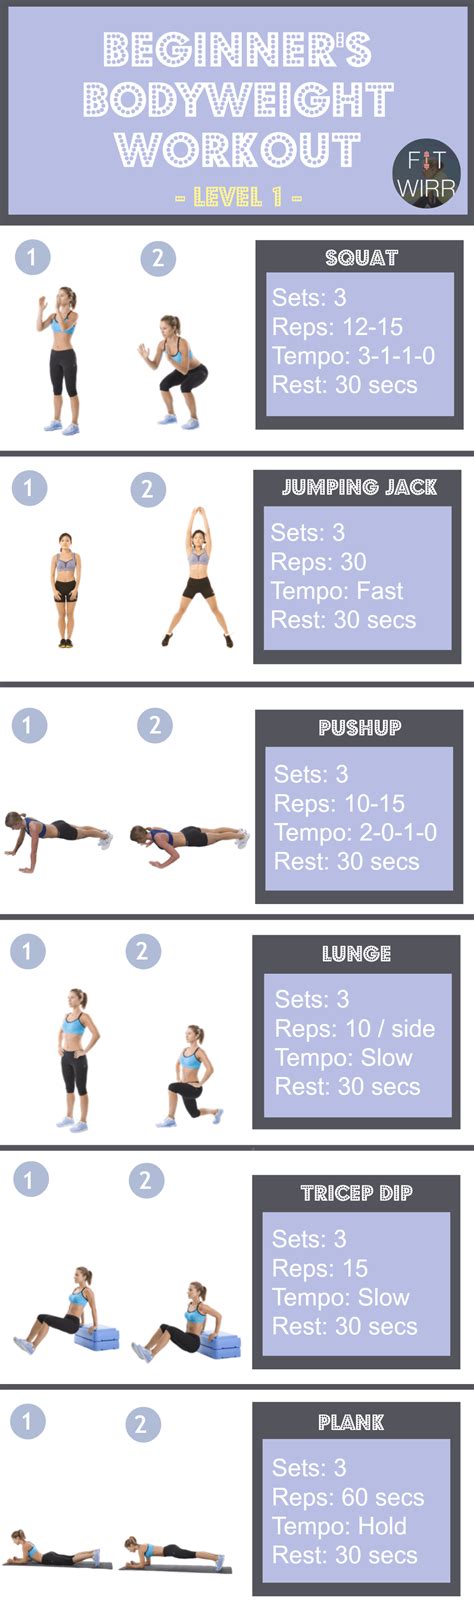 Best Bodyweight Workout For Beginners At Home Fitwirr Workout Plan